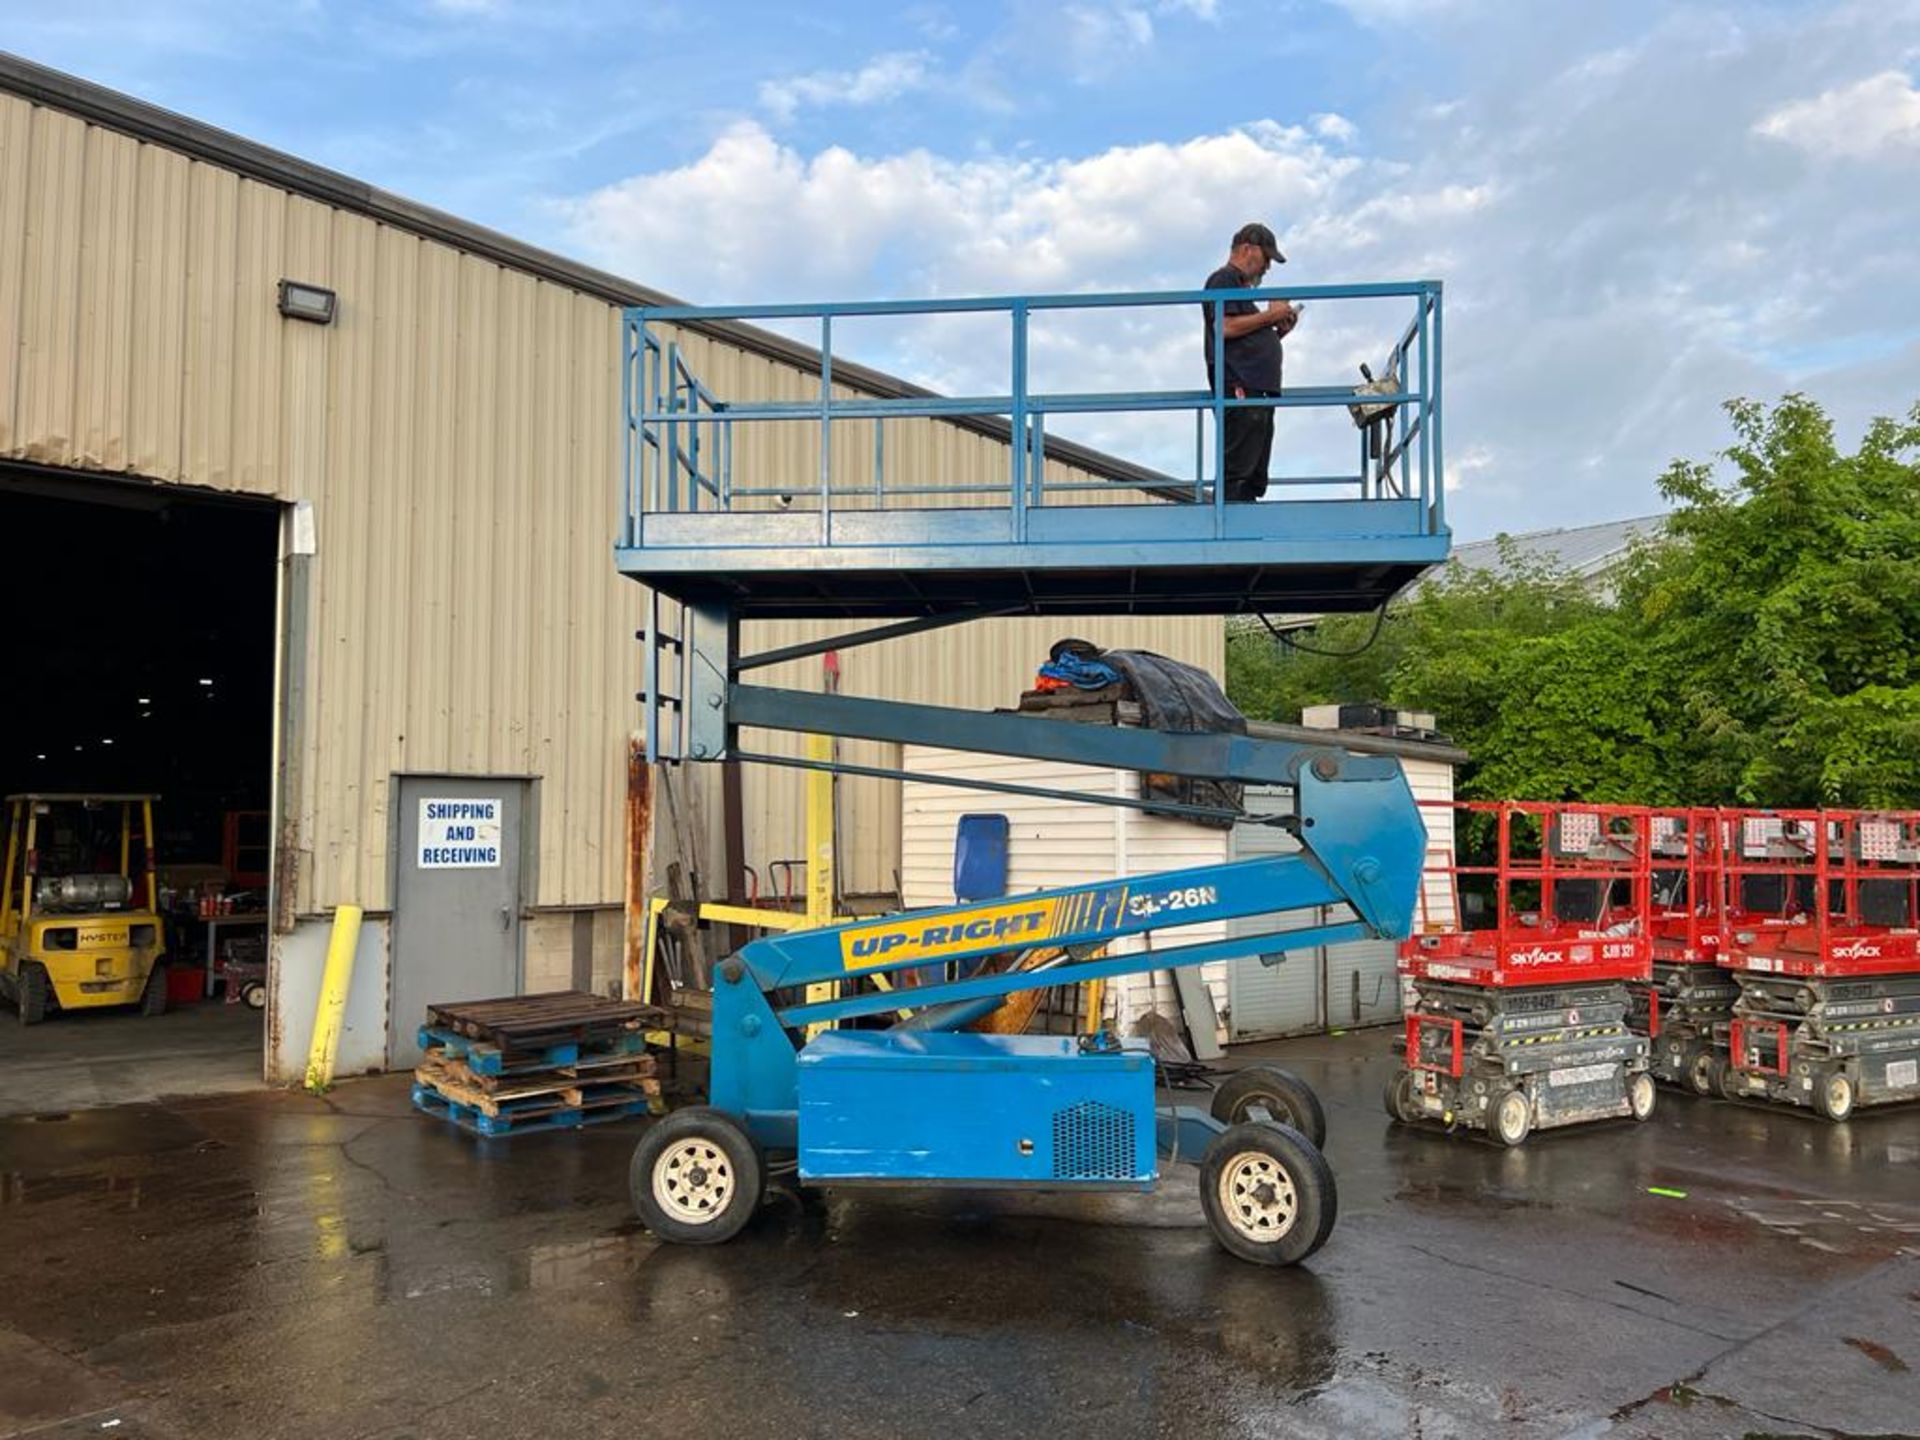 Up-Right SL-26 Electric Motorized Scissor Lift - with pendant controller with extendable platform - Image 2 of 4